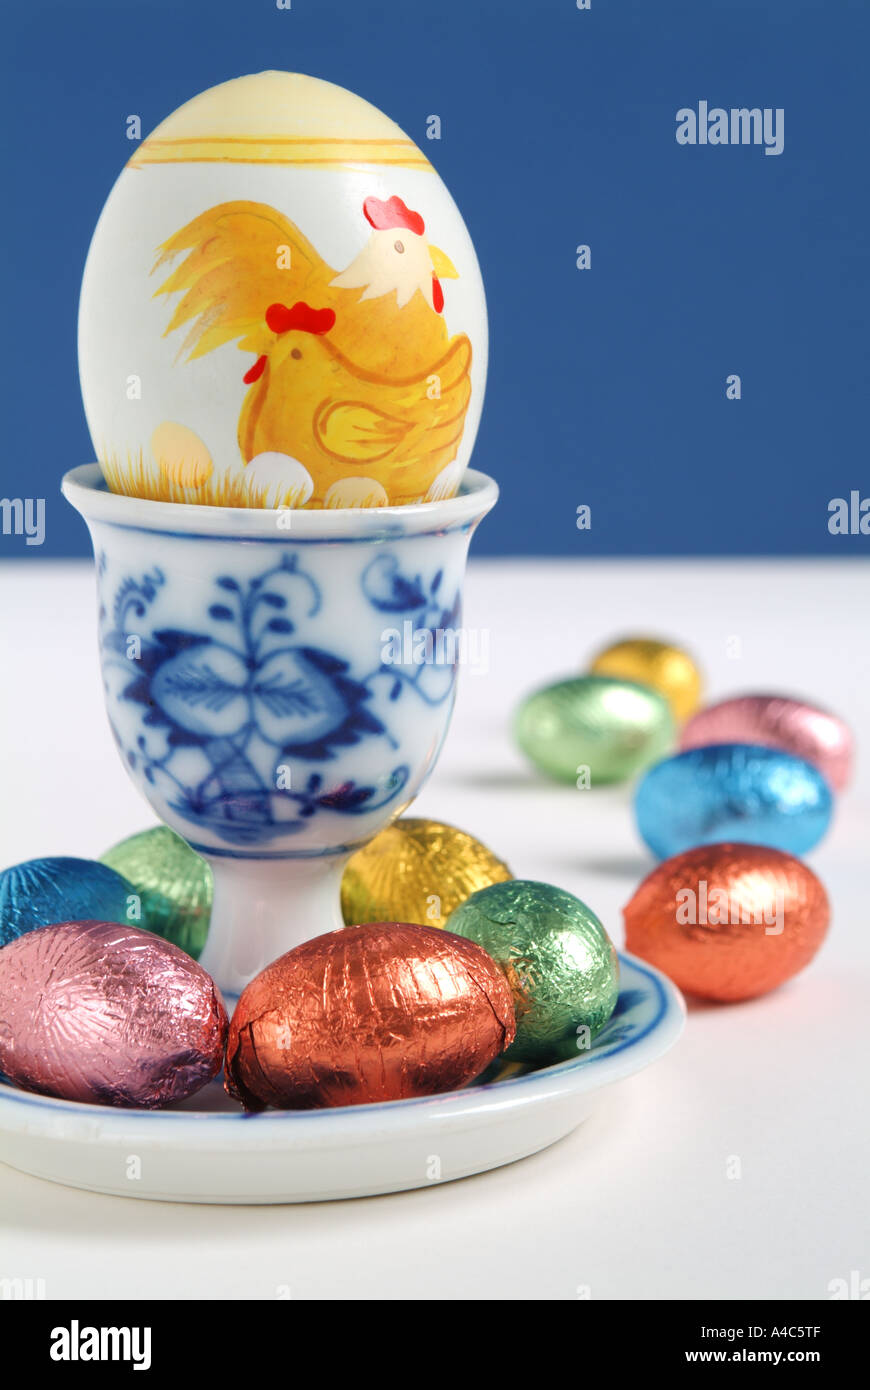 Painted and chocolate Easter eggs in and around a blue and white egg cup Stock Photo